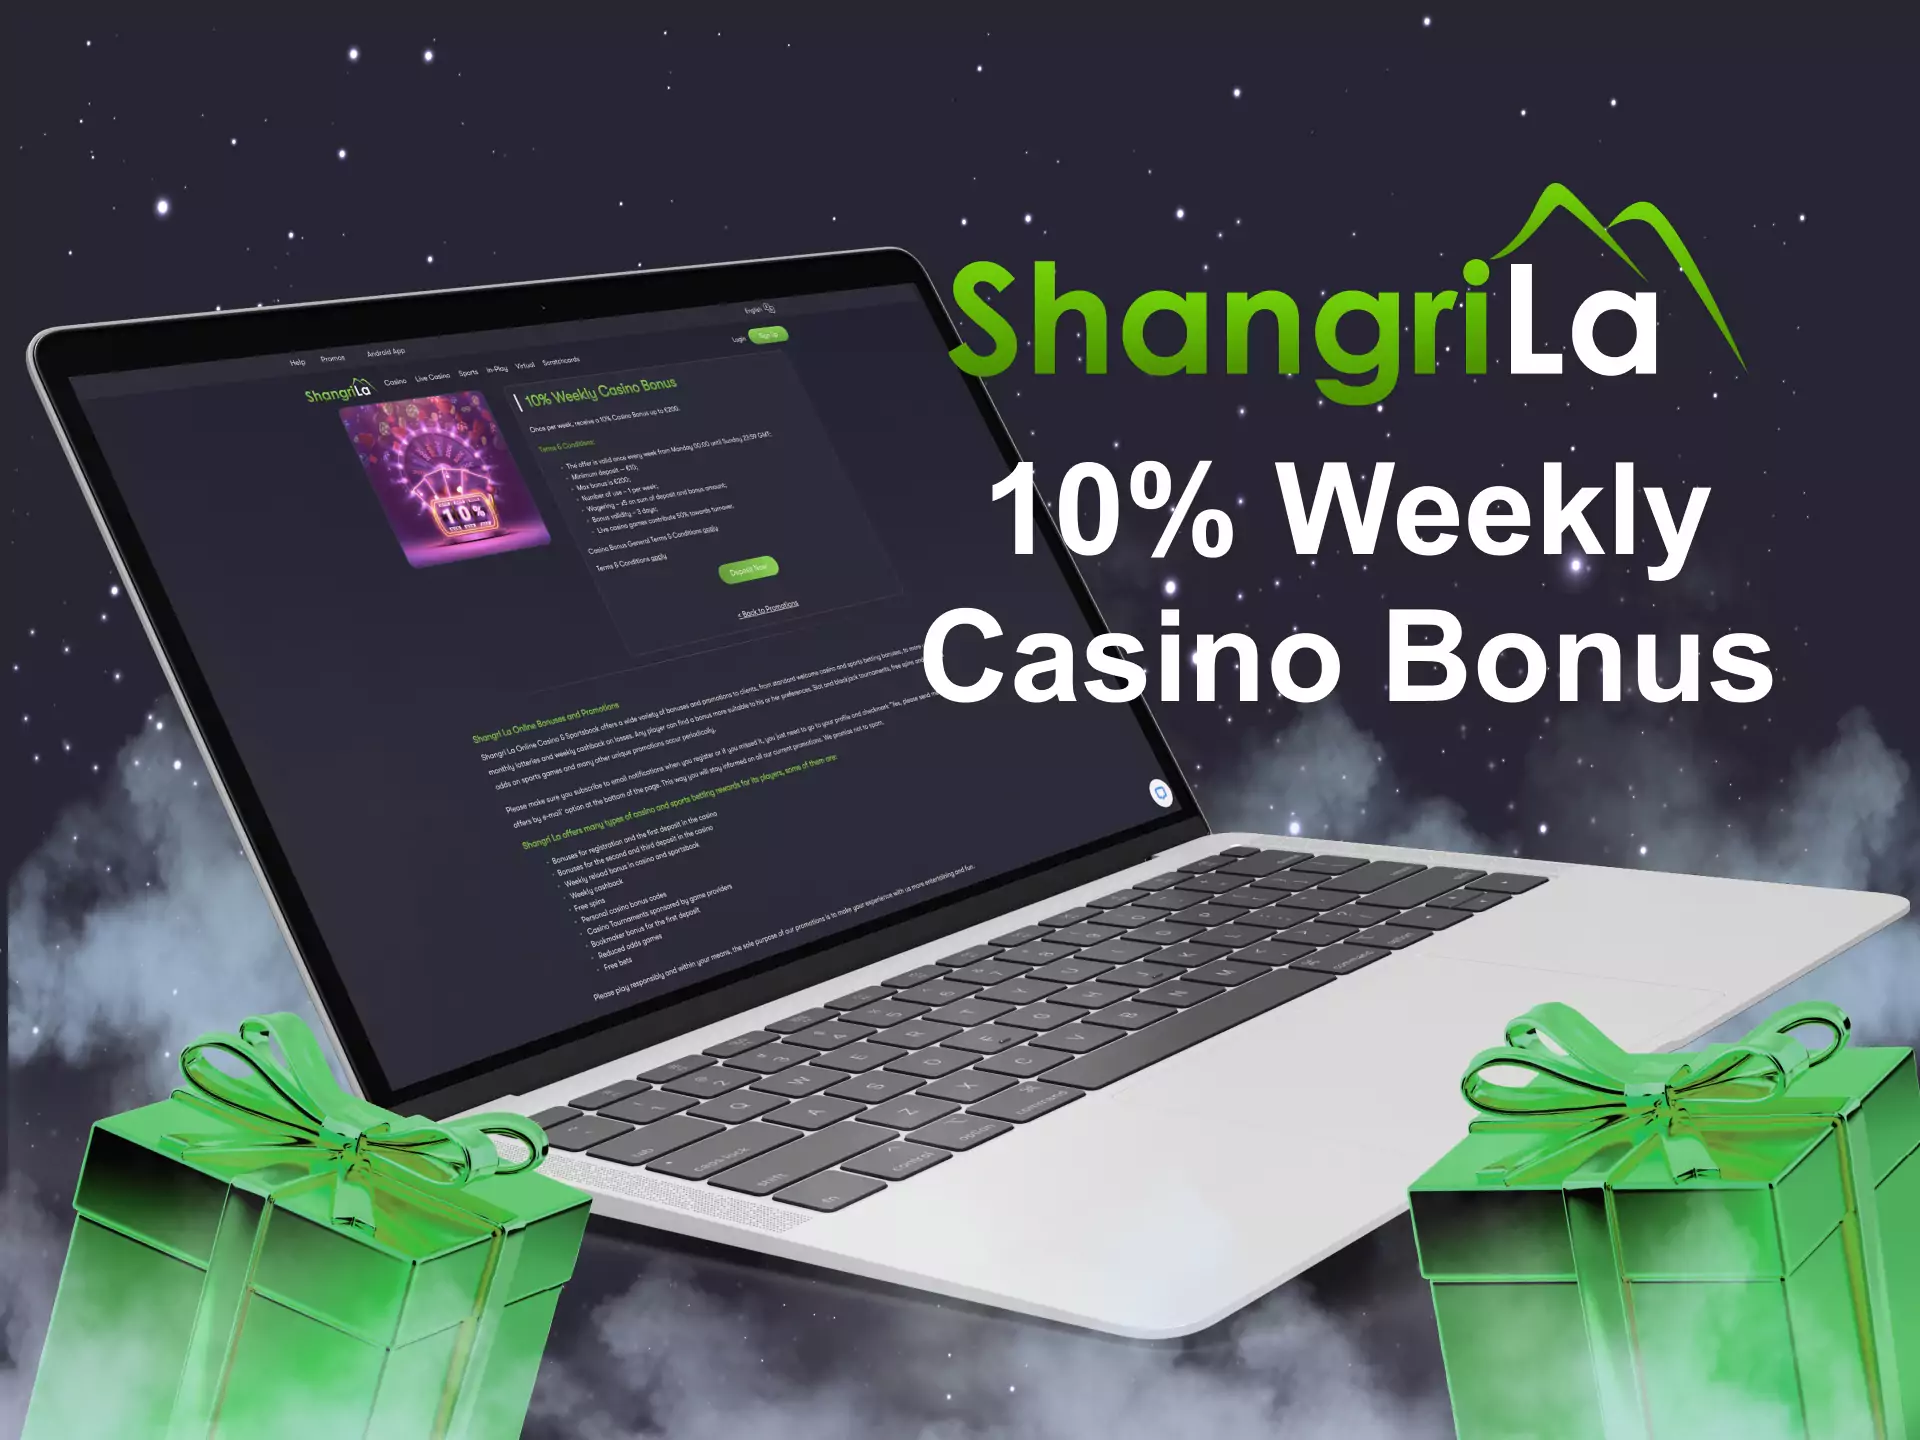 Casino players can receive a weekly casino bonus from Shangri La.